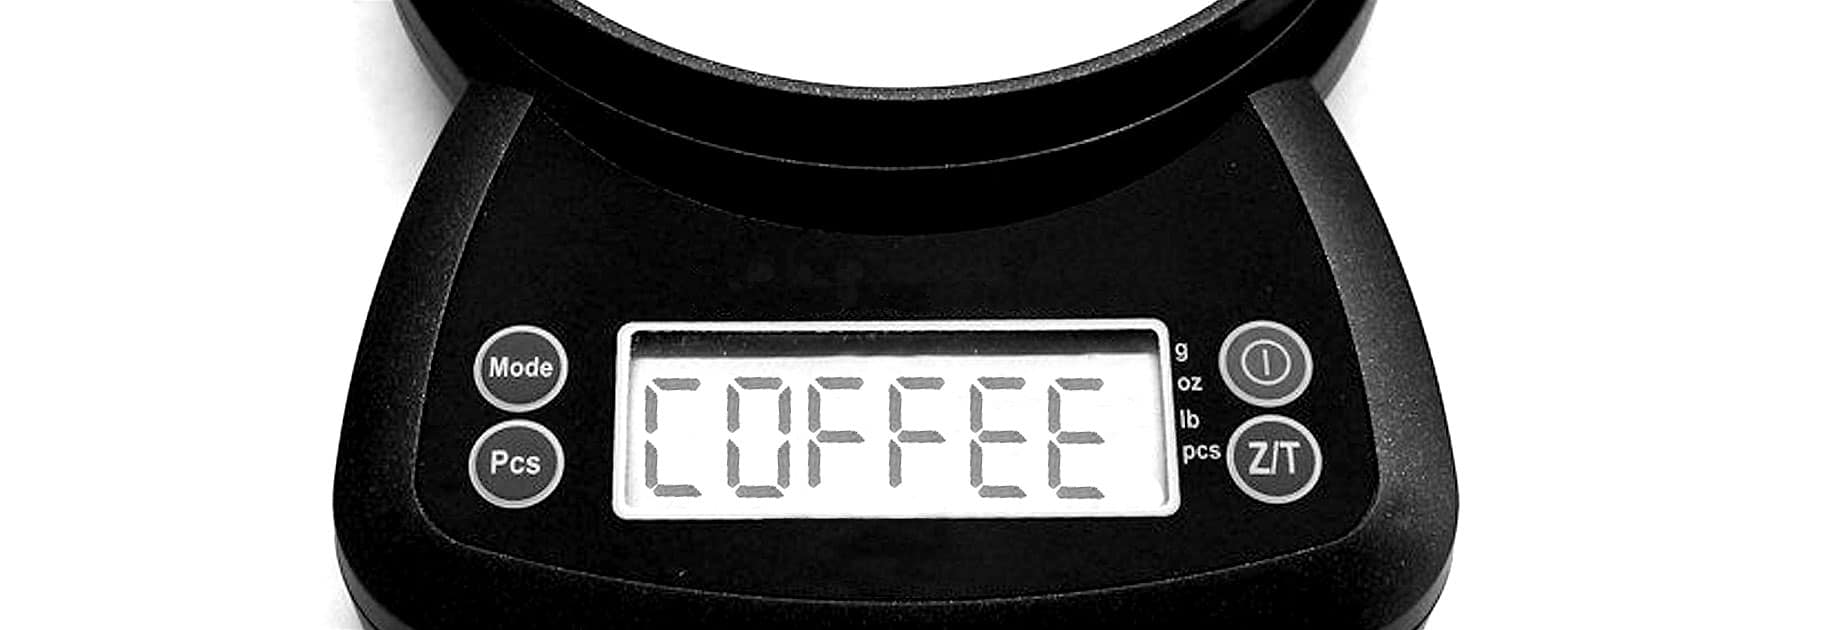 ERAVSOW Coffee Scale with Timer,USB Rechargeable Pour Over Coffee